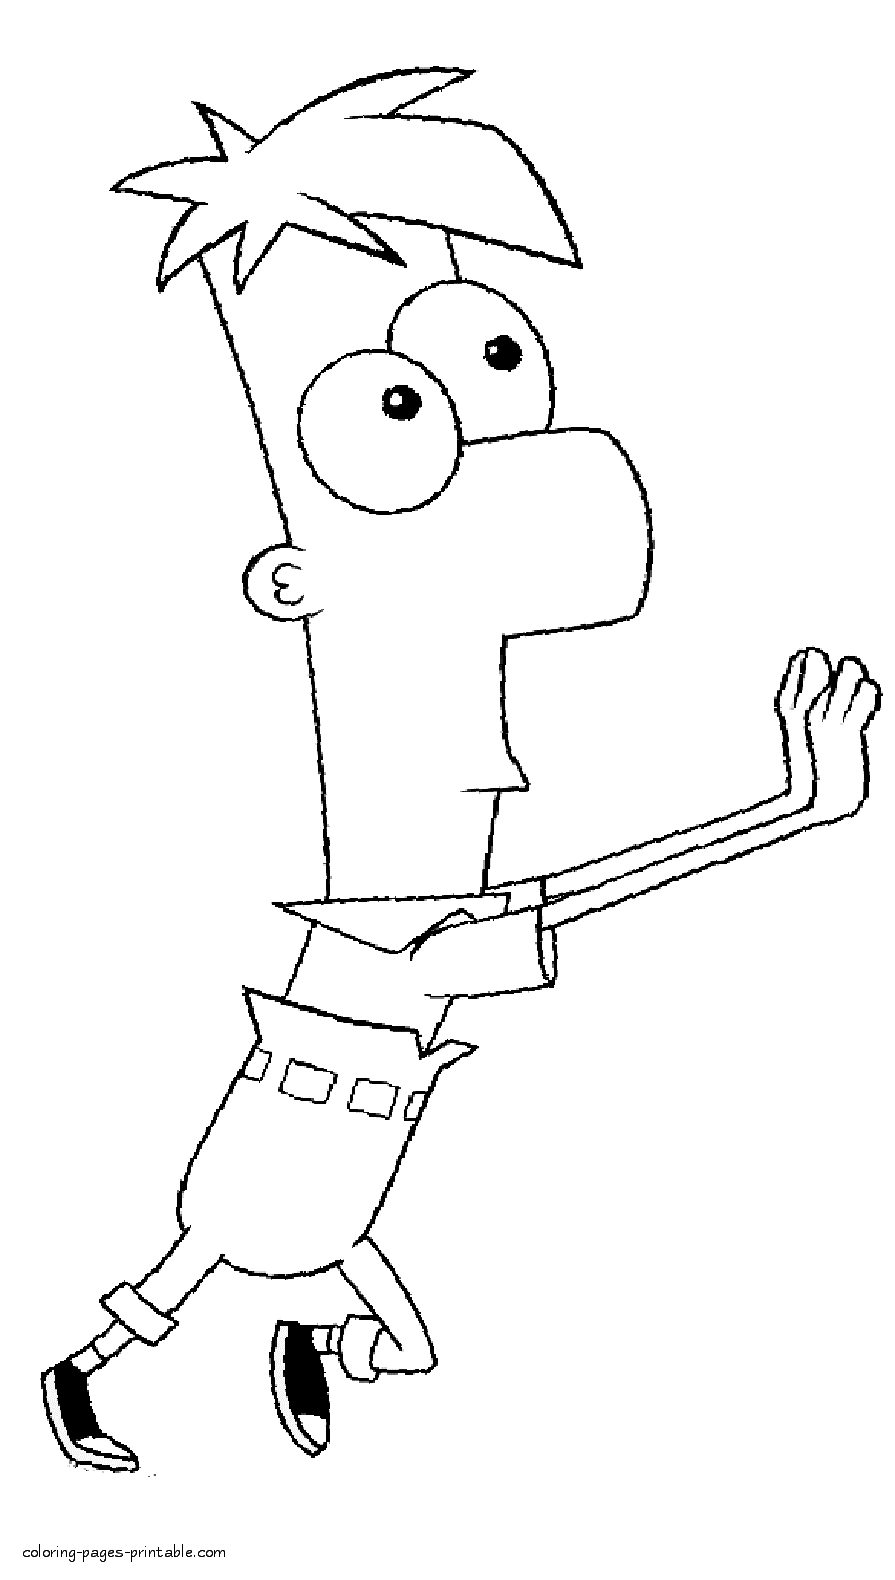 Coloring page of Ferb || COLORING-PAGES-PRINTABLE.COM